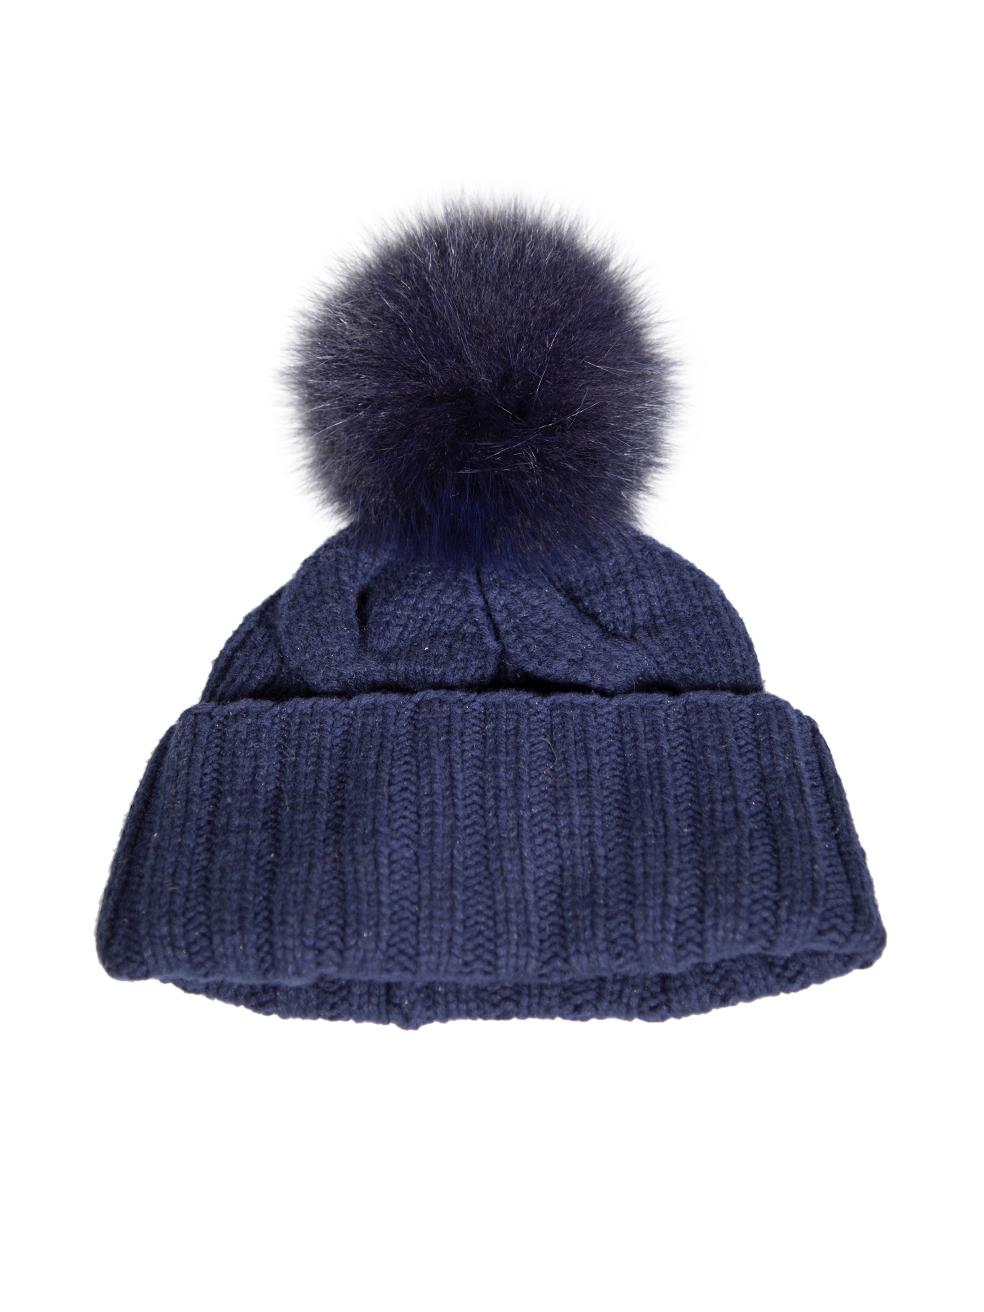 Loro Piana Blue Cashmere Cable Knit Pom Pom Hat In Excellent Condition For Sale In London, GB